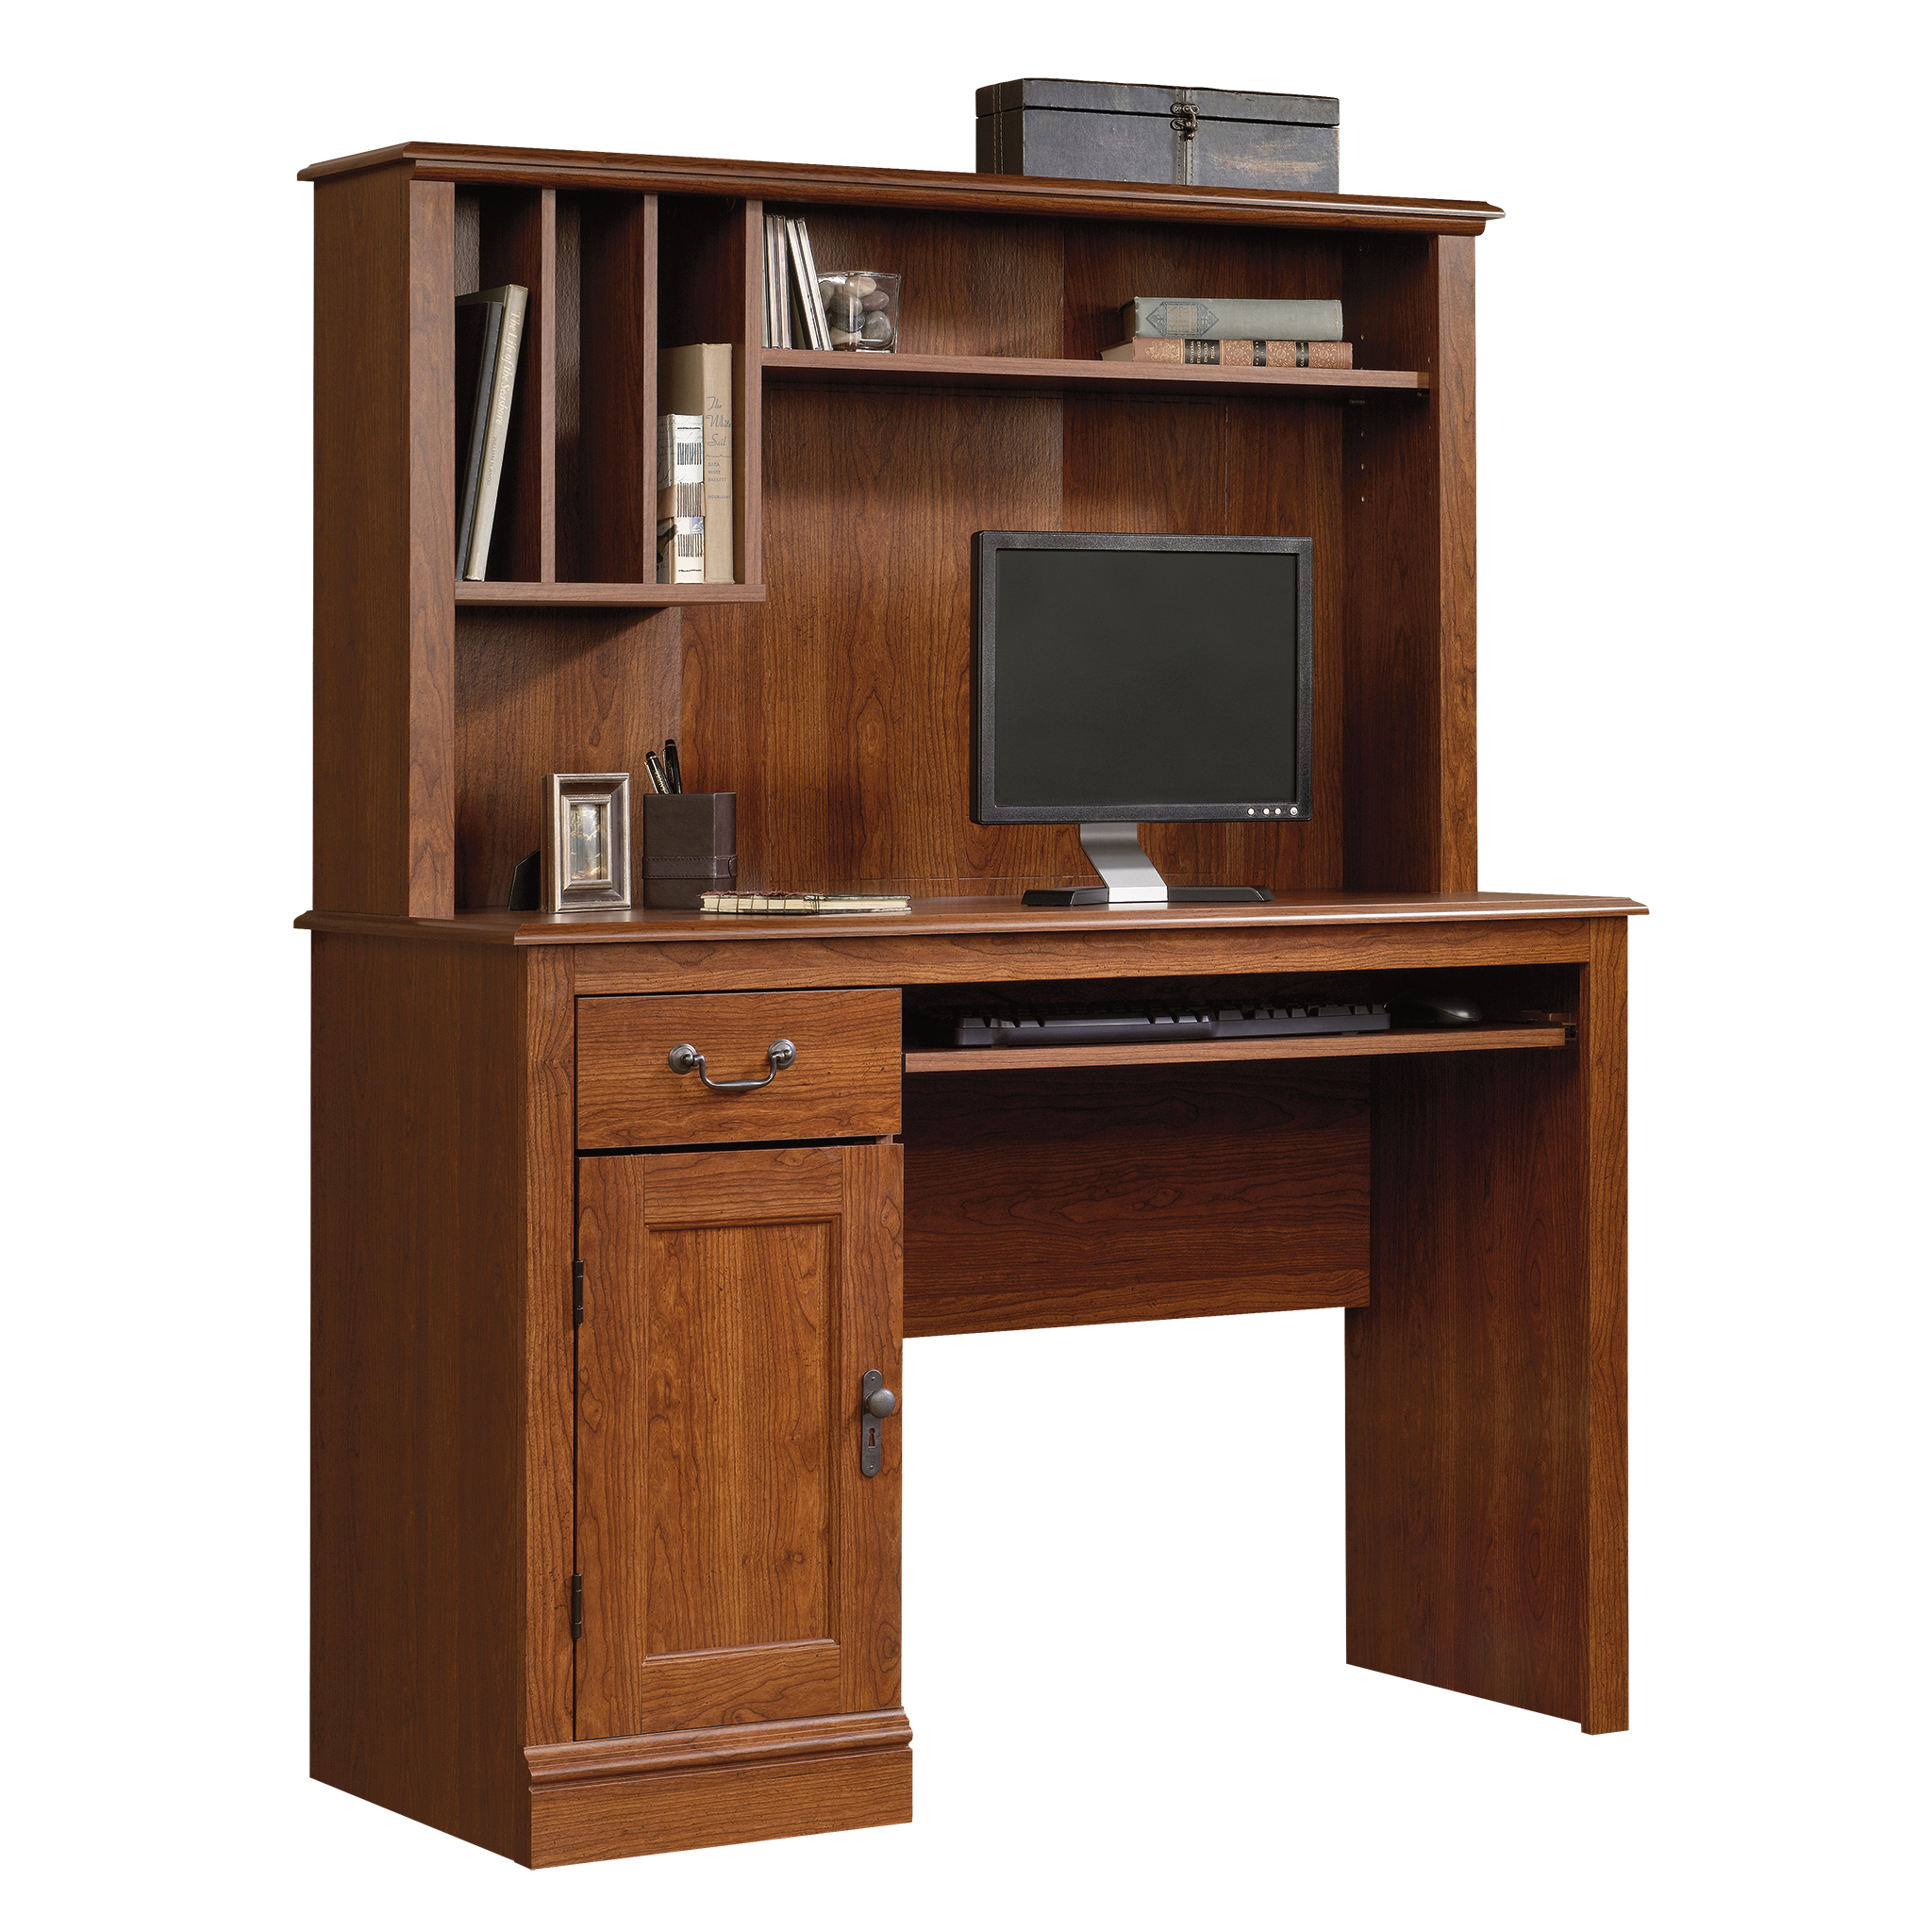 Sauder Camden County Computer Desk w/Hutch, Planked Cherry Finish - image 1 of 6